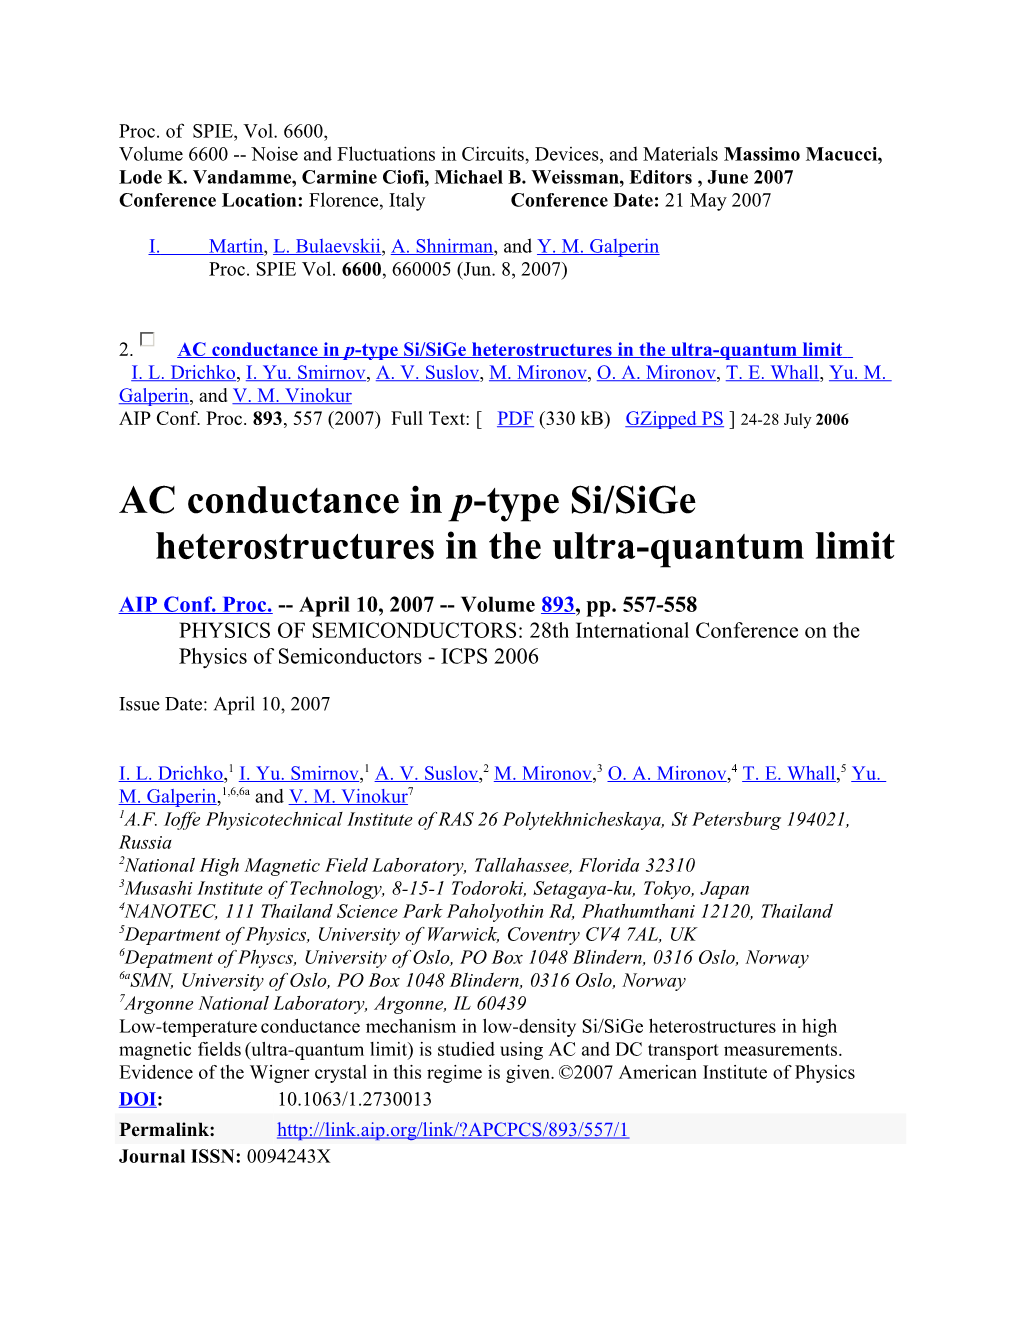 AC Conductance in P-Type Si/Sige Heterostructures in the Ultra-Quantum Limit